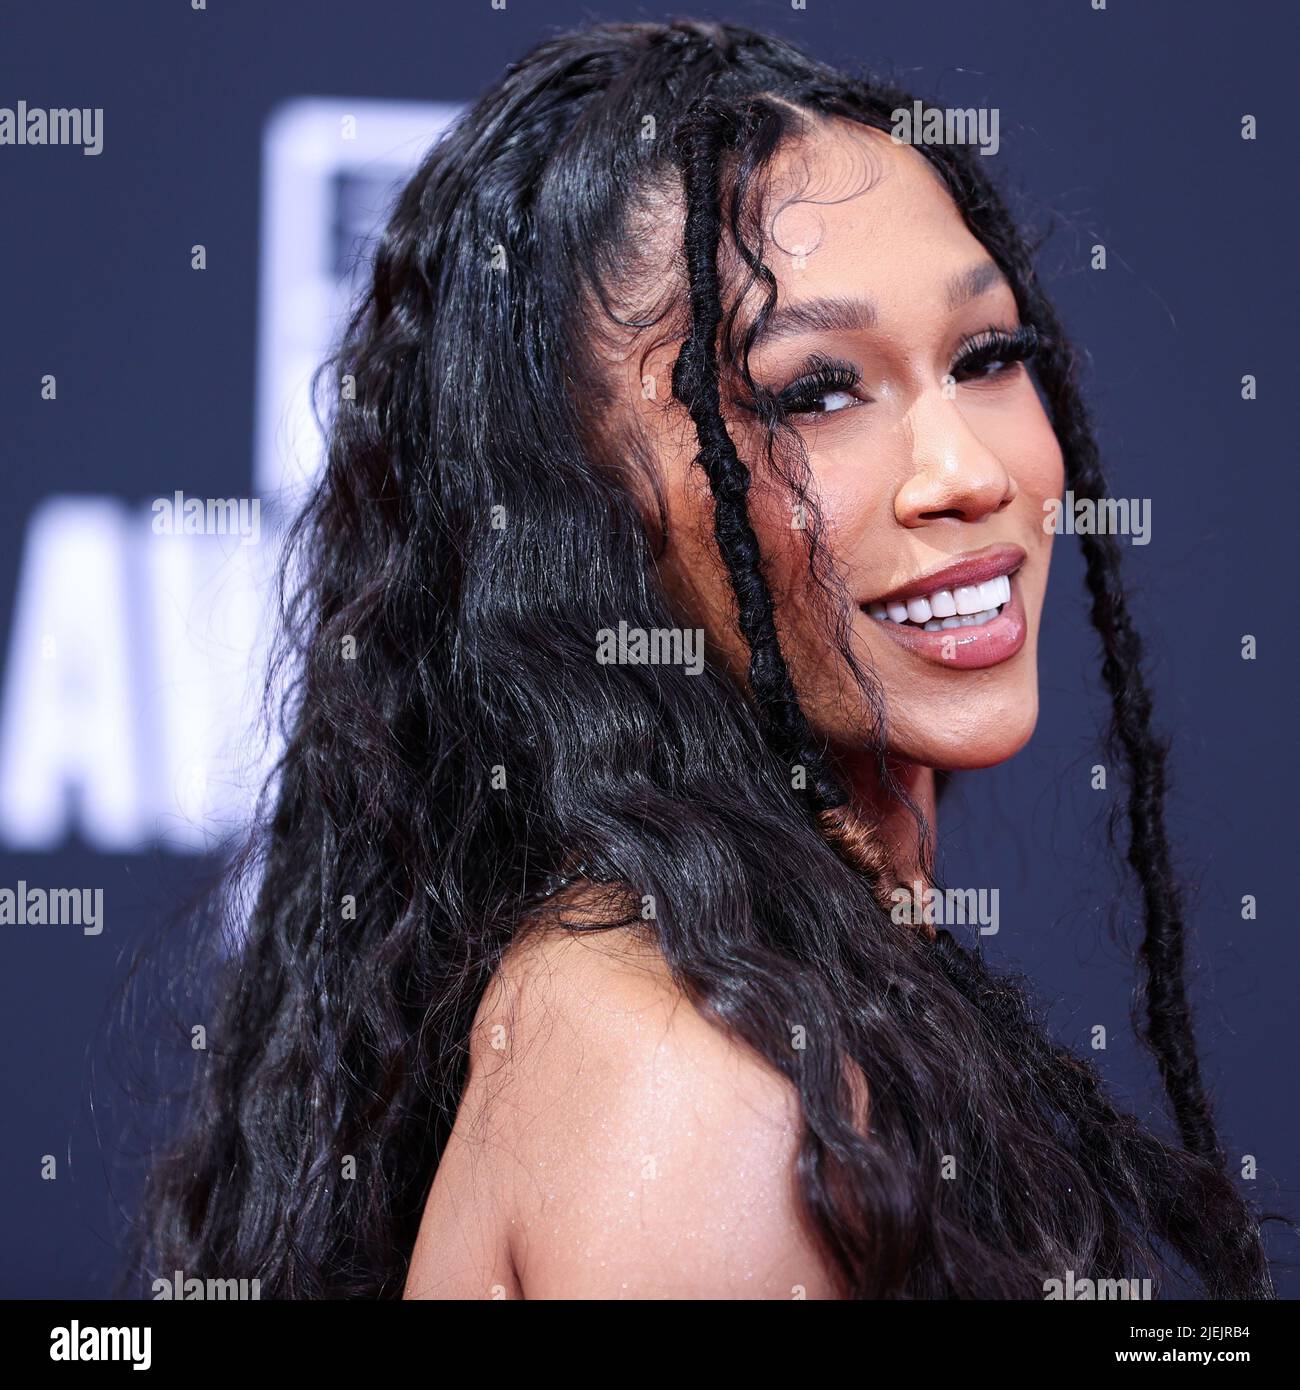 LOS ANGELES, CALIFORNIA, USA - JUNE 26: American rapper BIA arrives at the BET Awards 2022 held at Microsoft Theater at L.A. Live on June 26, 2022 in Los Angeles, California, United States. (Photo by Xavier Collin/Image Press Agency) Credit: Image Press Agency/Alamy Live News Stock Photo